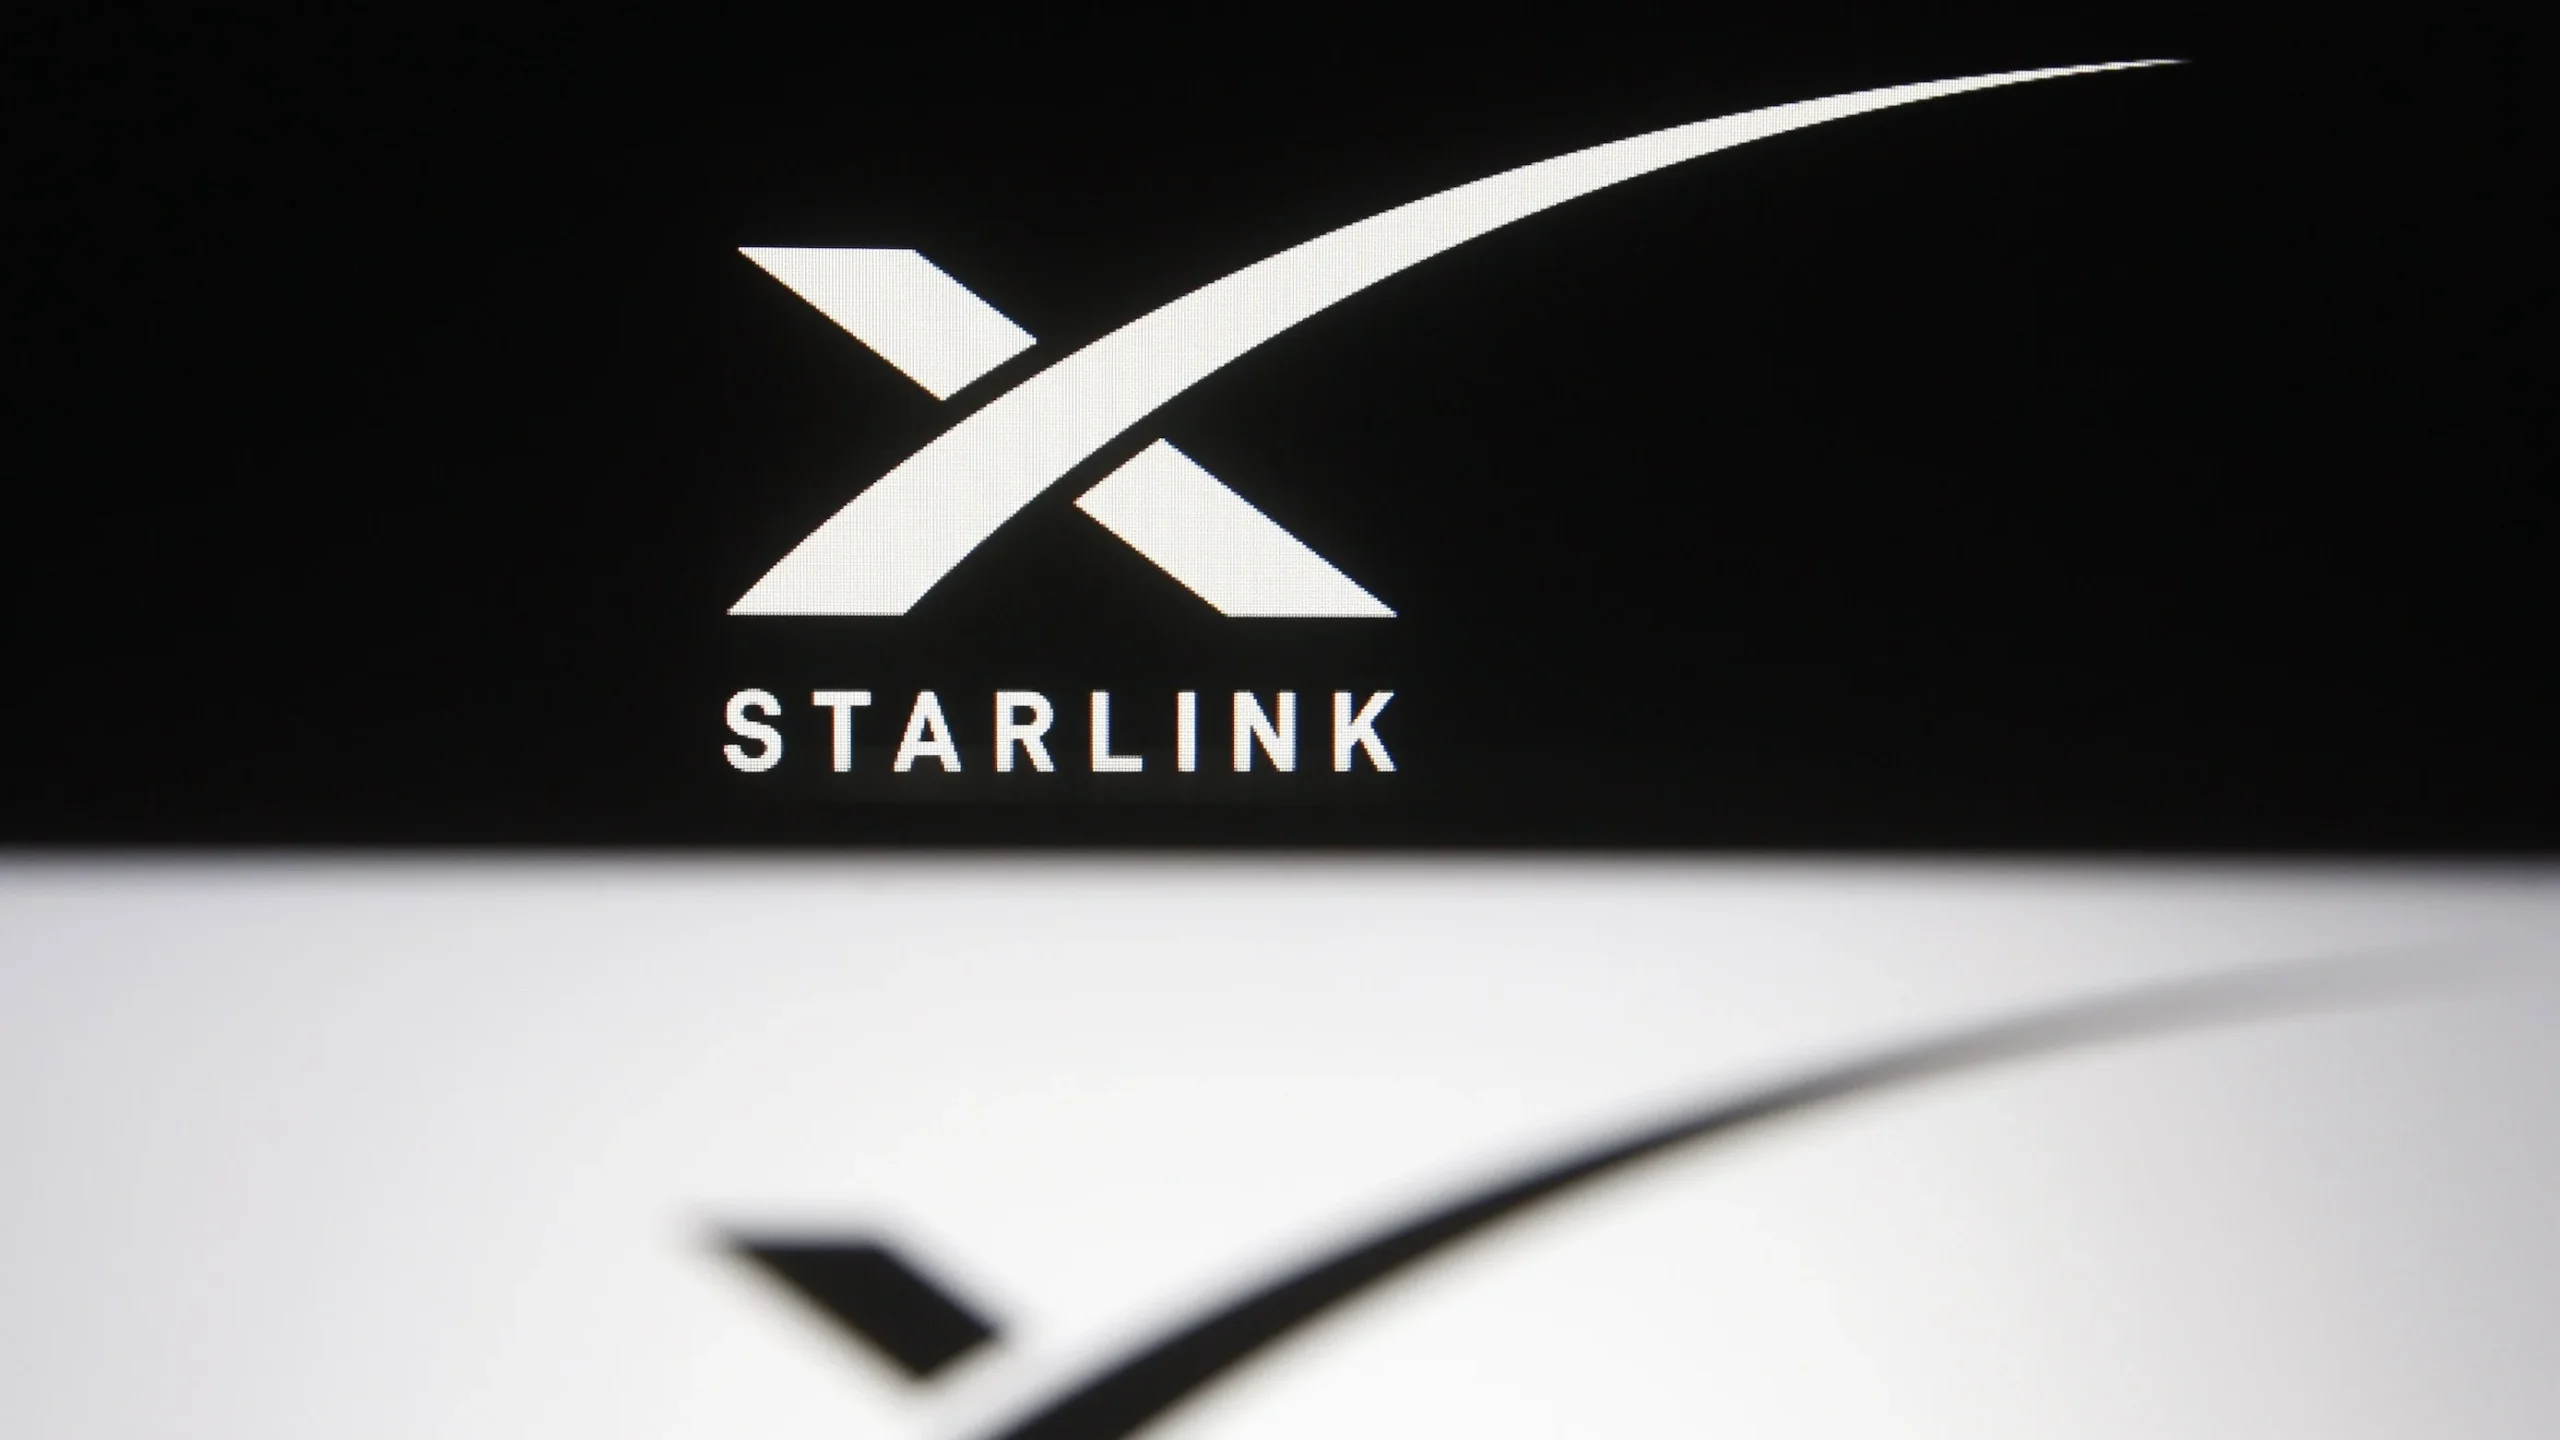 Why SpaceX Has Not Been Able To Launch Starlink in Vietnam Yet?